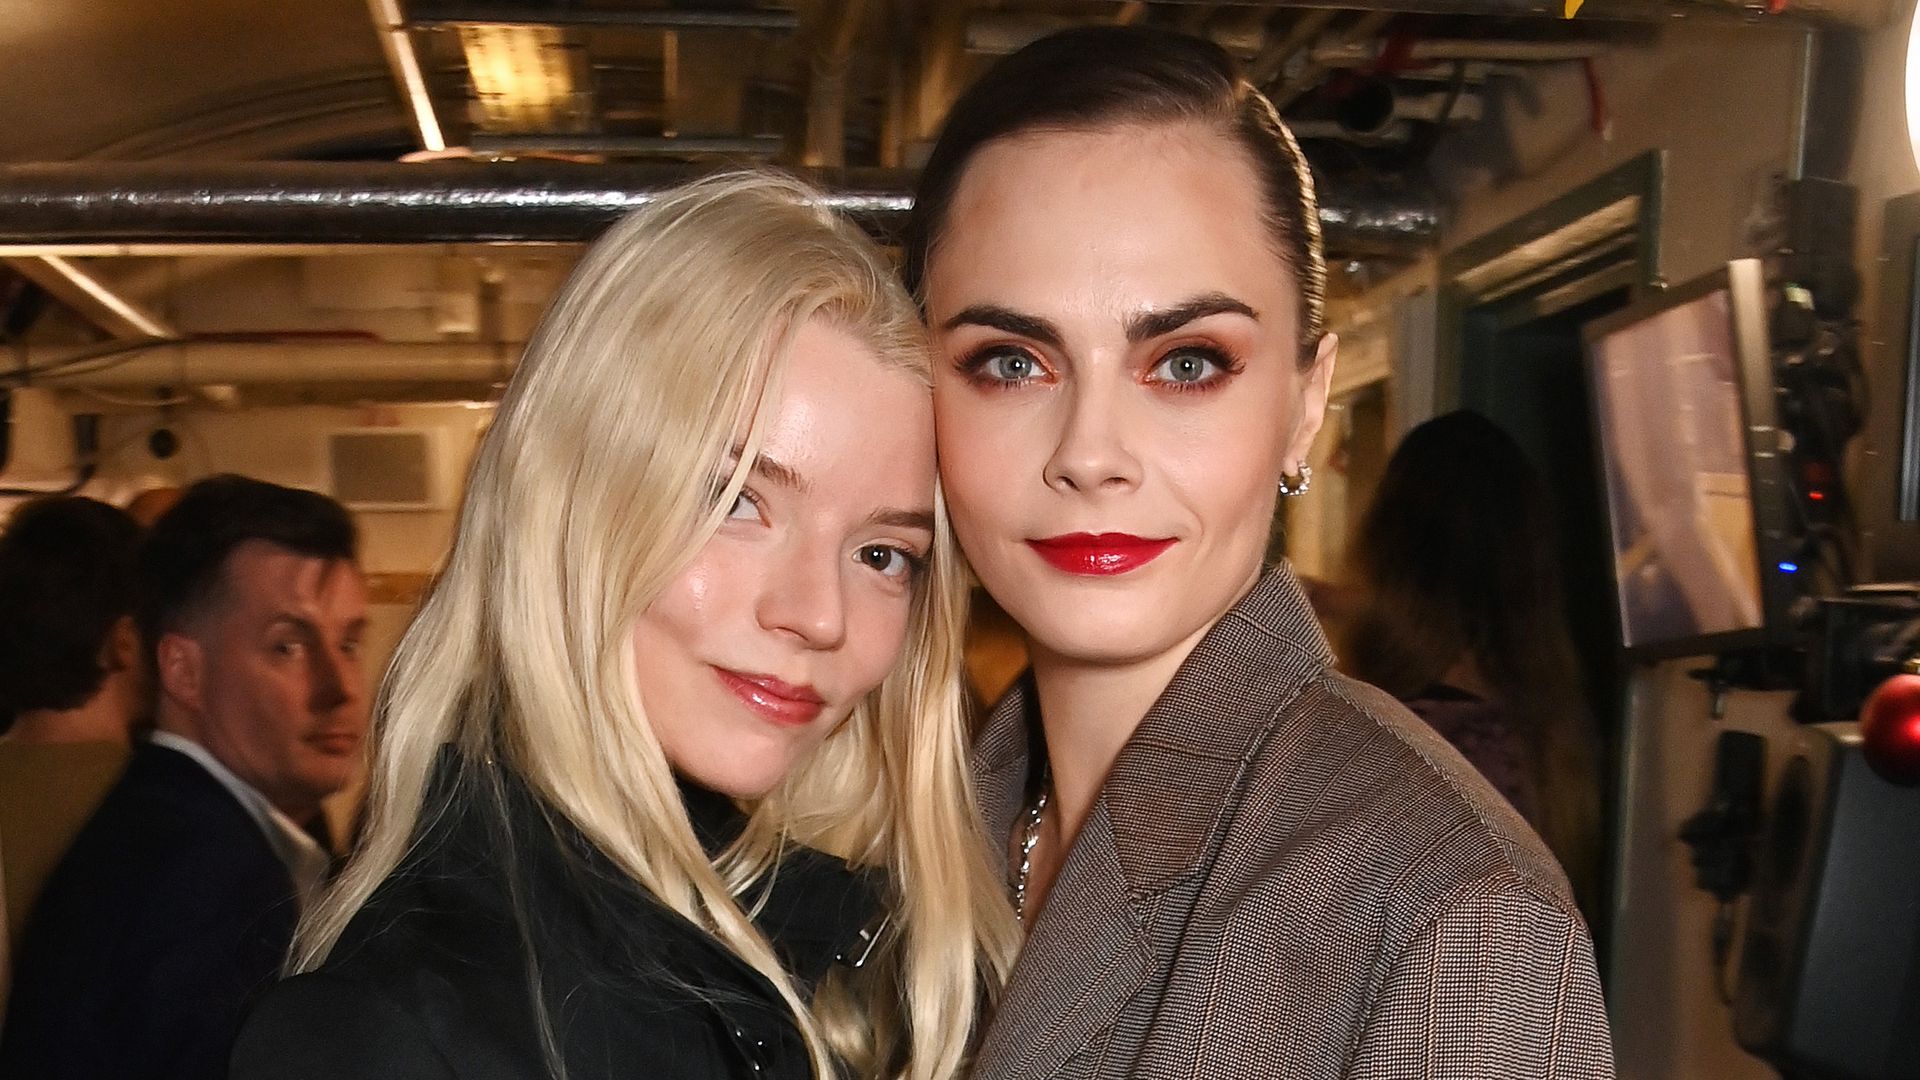 Anya Taylor-Joy and Cara Delevingne showcase contrasting styles on glam London night out